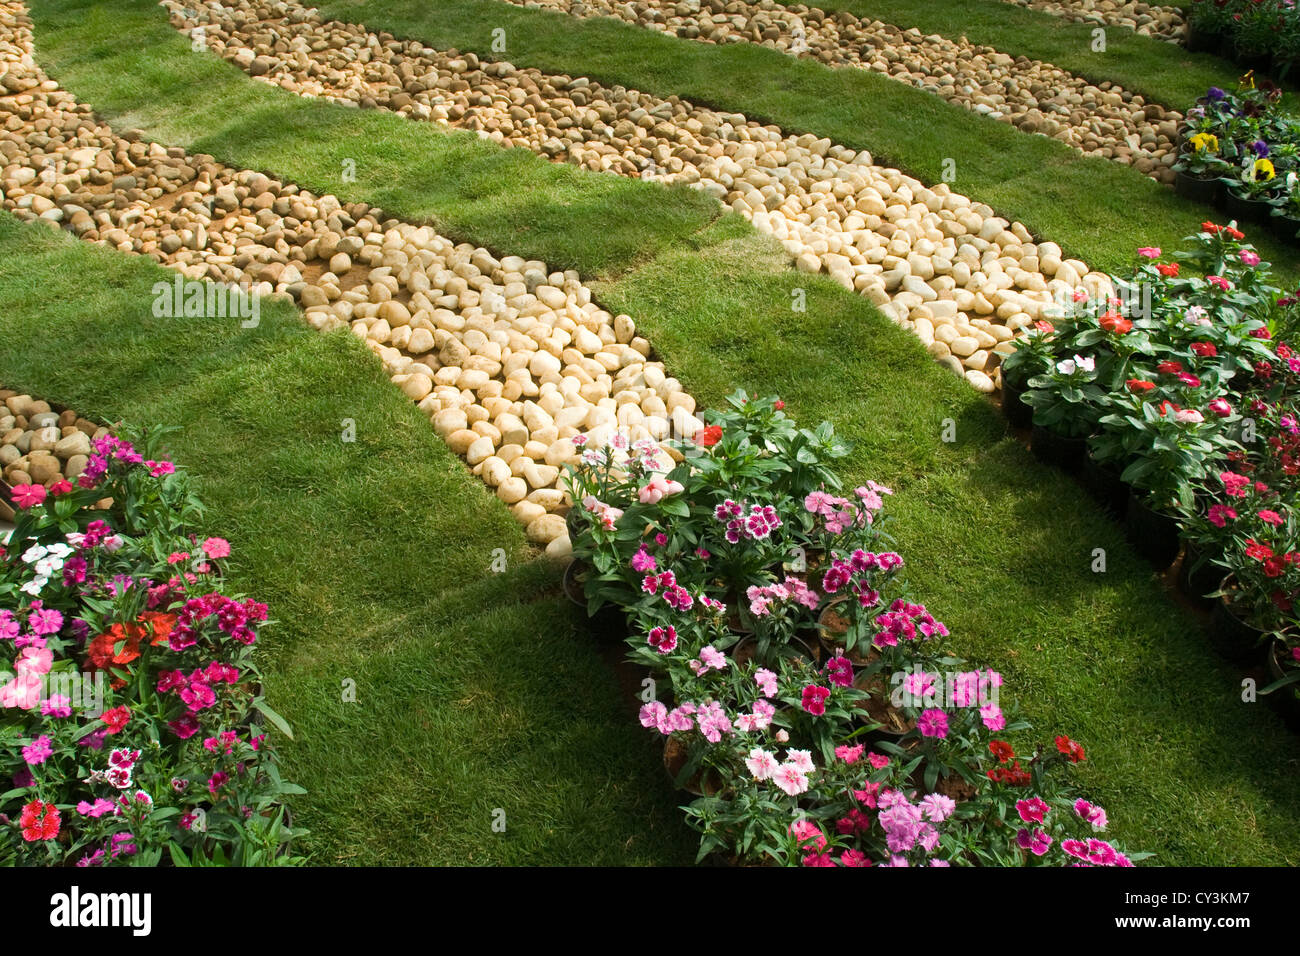 Neatly laid decorative bands of lawn, pebbles and flower beds Stock Photo